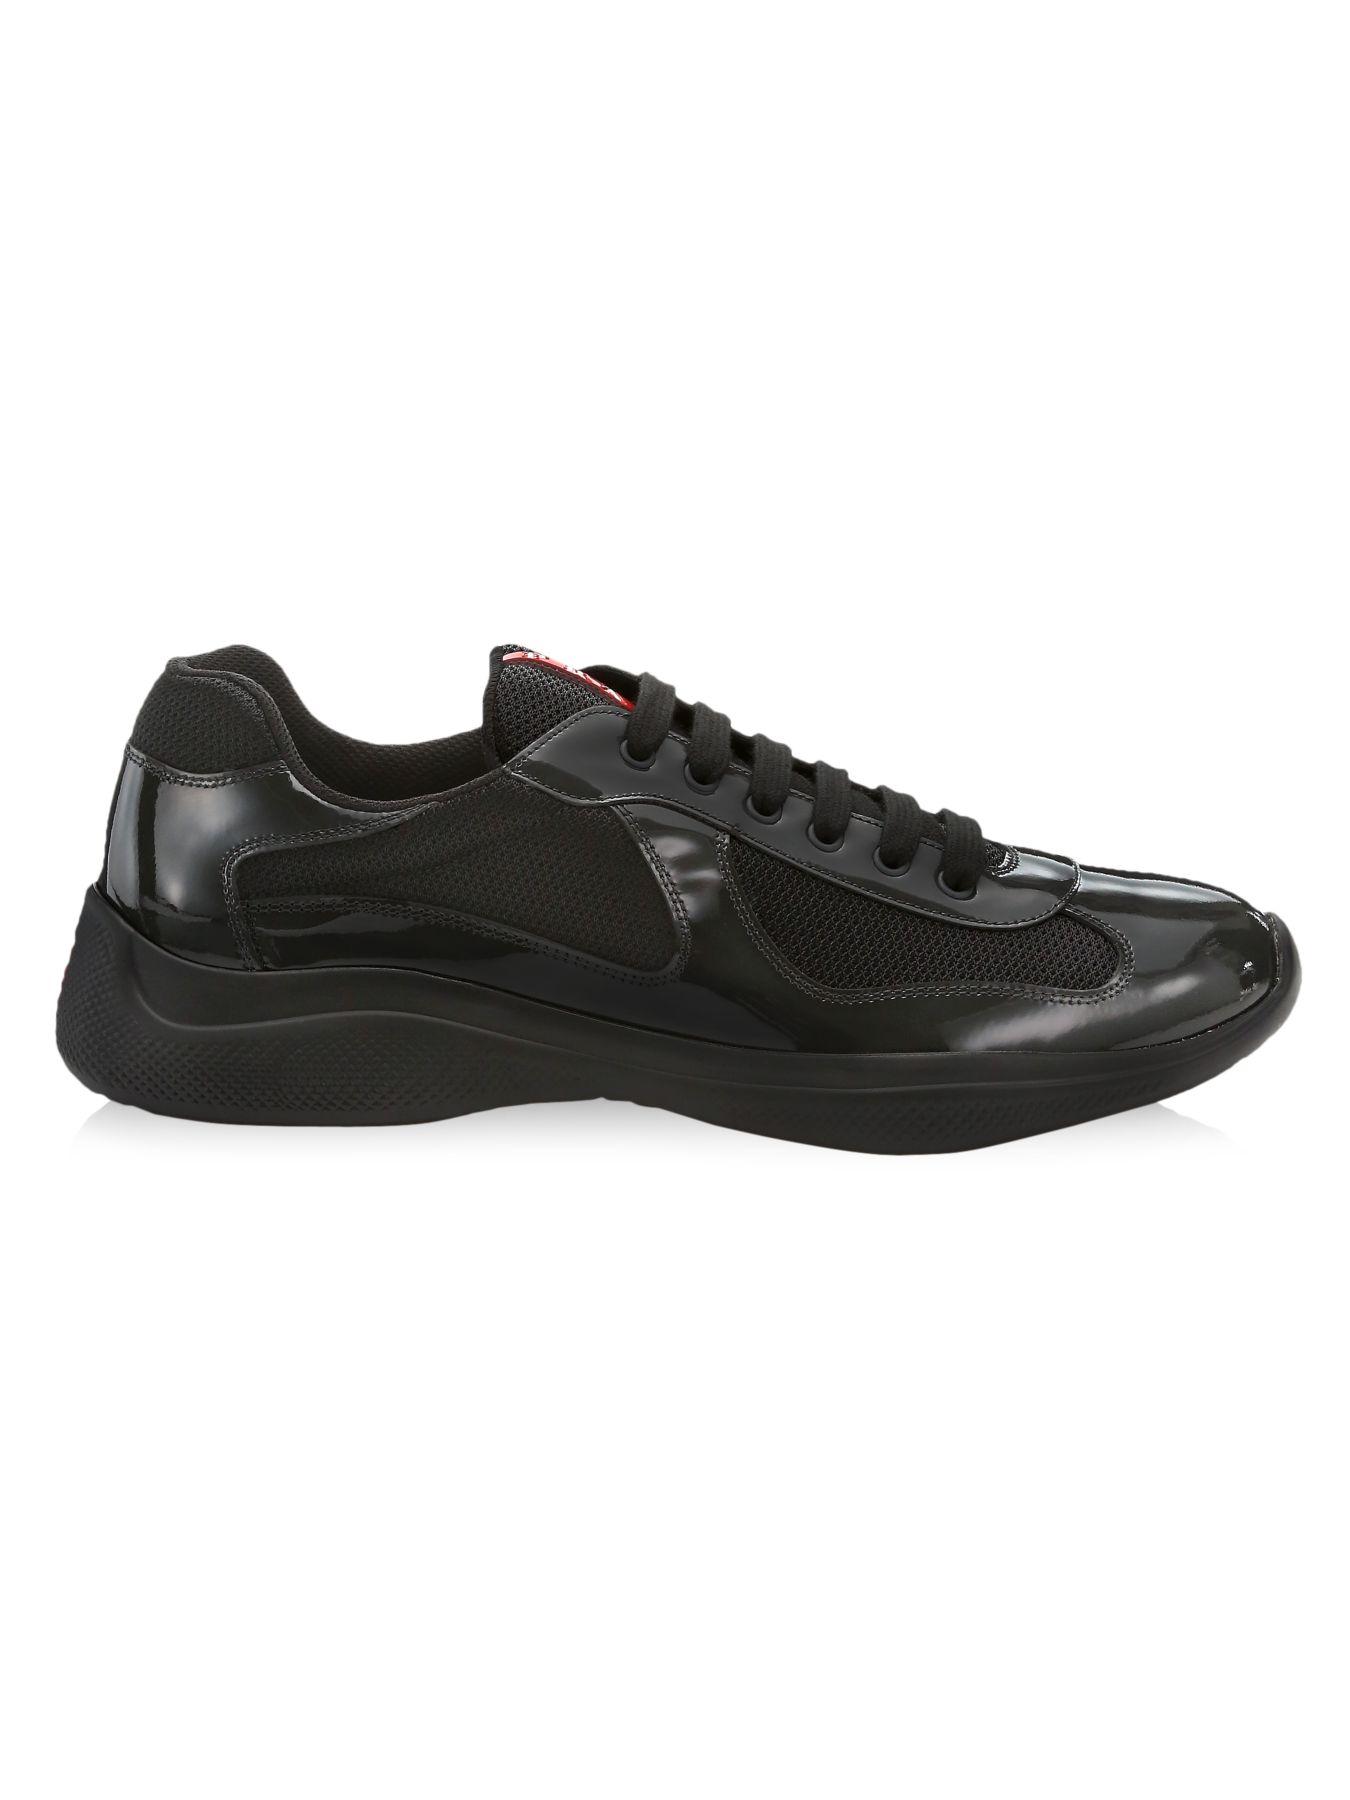 Prada America's Cup Patent Leather & Technical Fabric Sneakers in Black ...